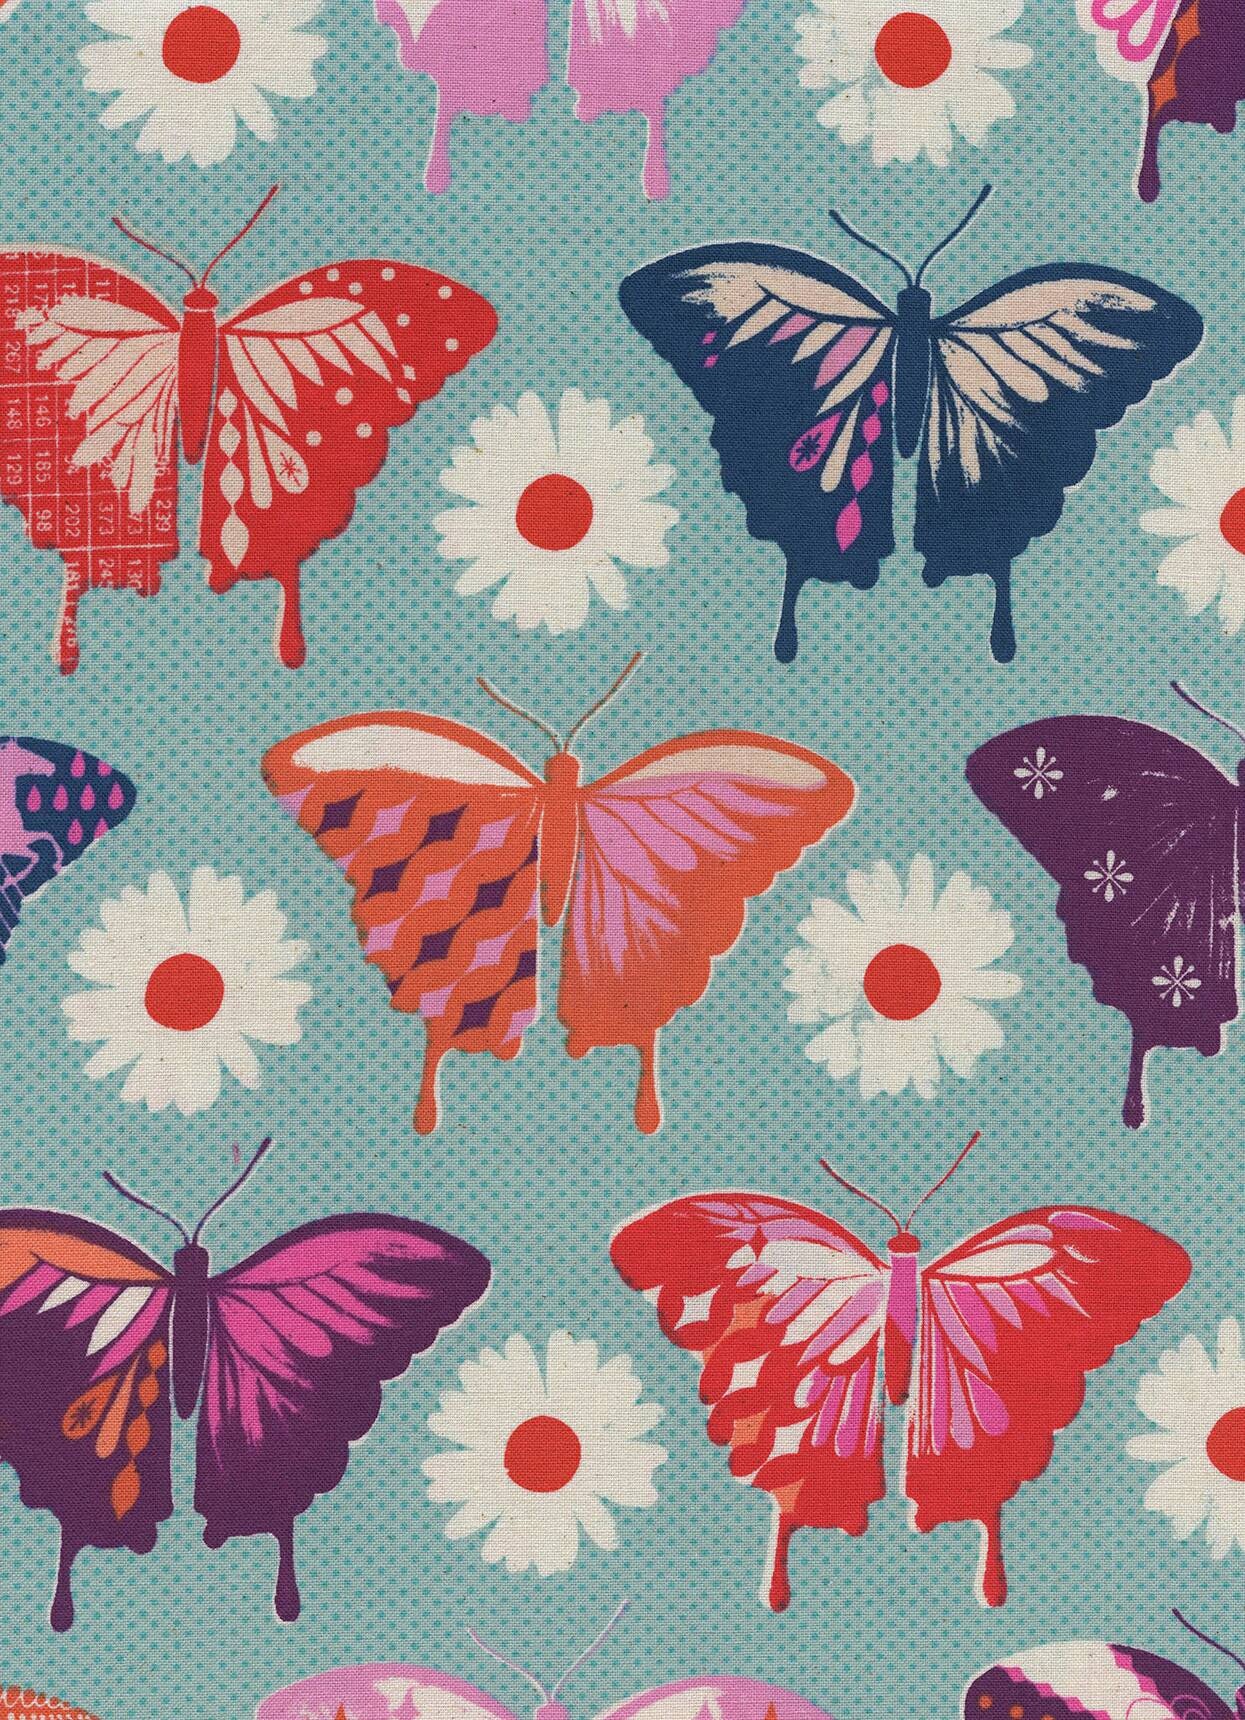 Butterfly Fabric 